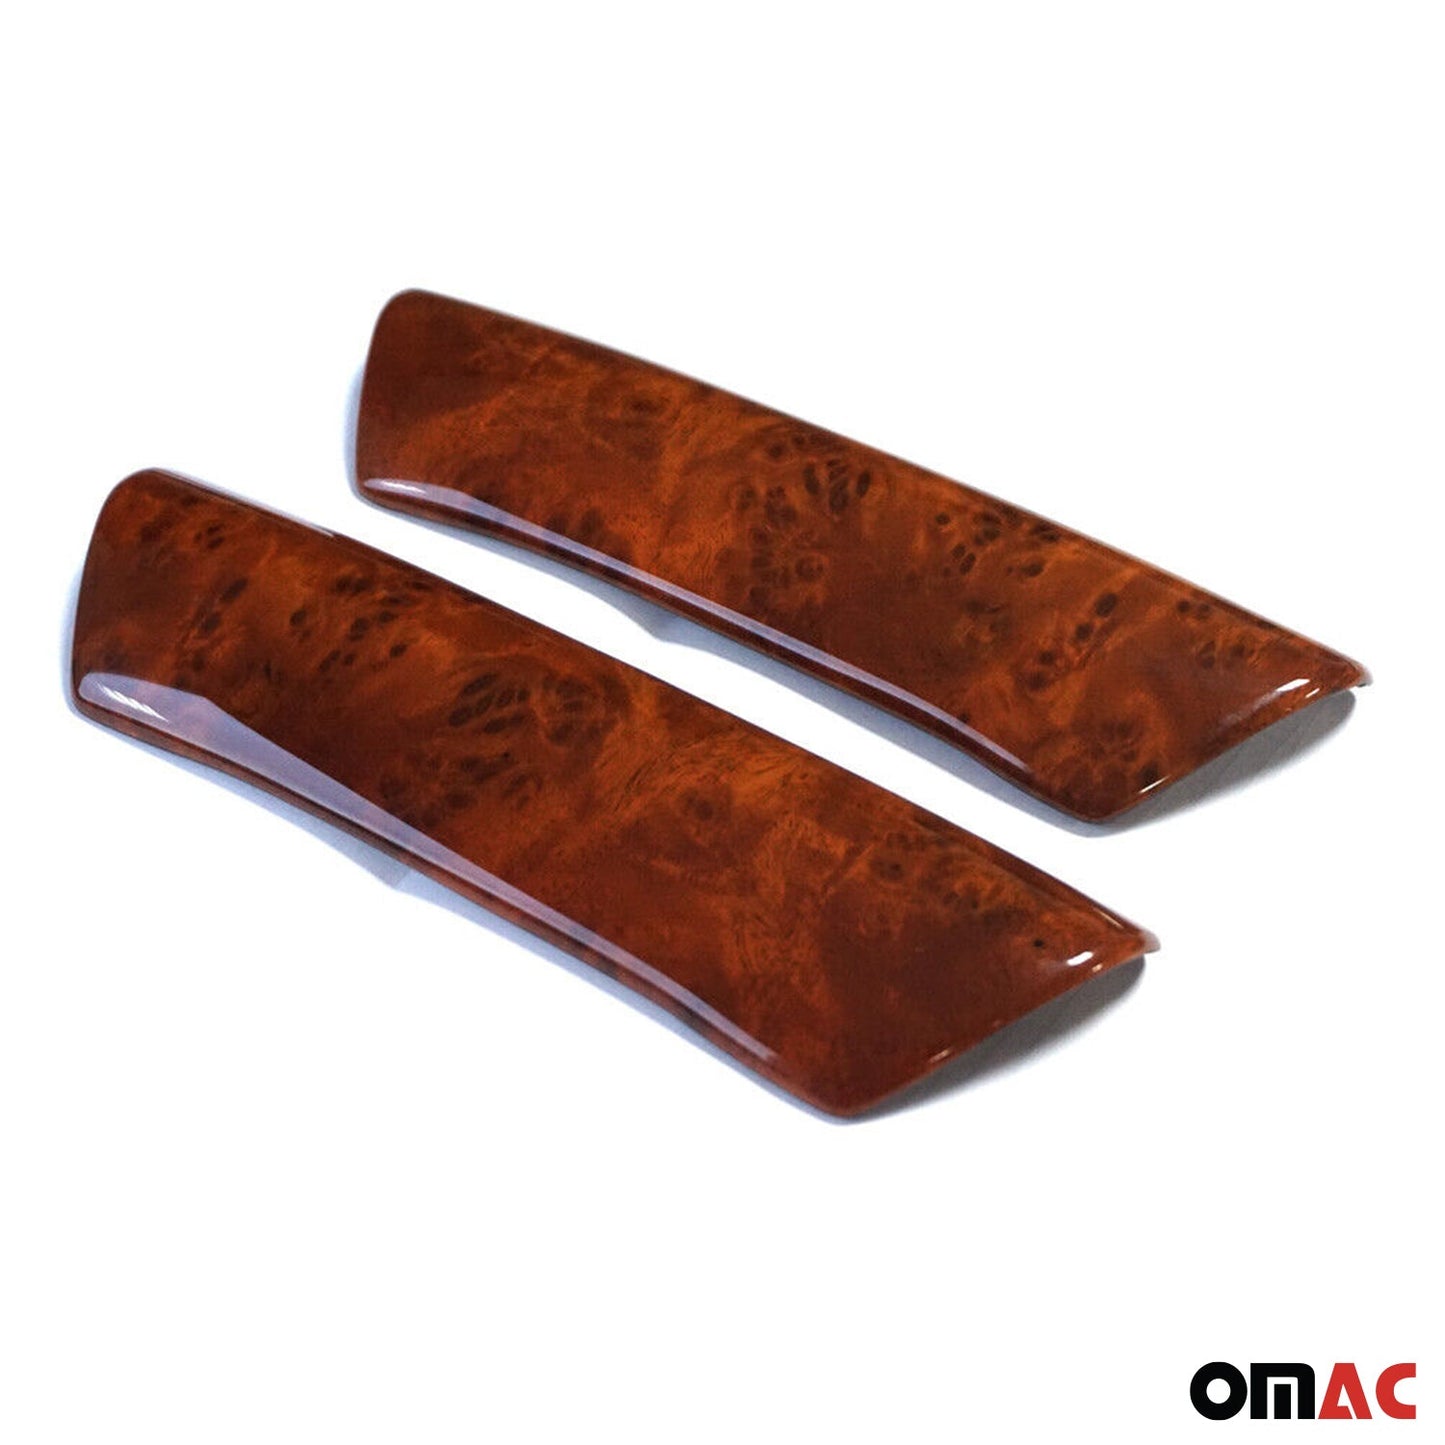 OMAC Wood Wrap Interior Door Handle Cover for VW T5 Transporter 2003-2015 Brown 2 Pcs 7522032